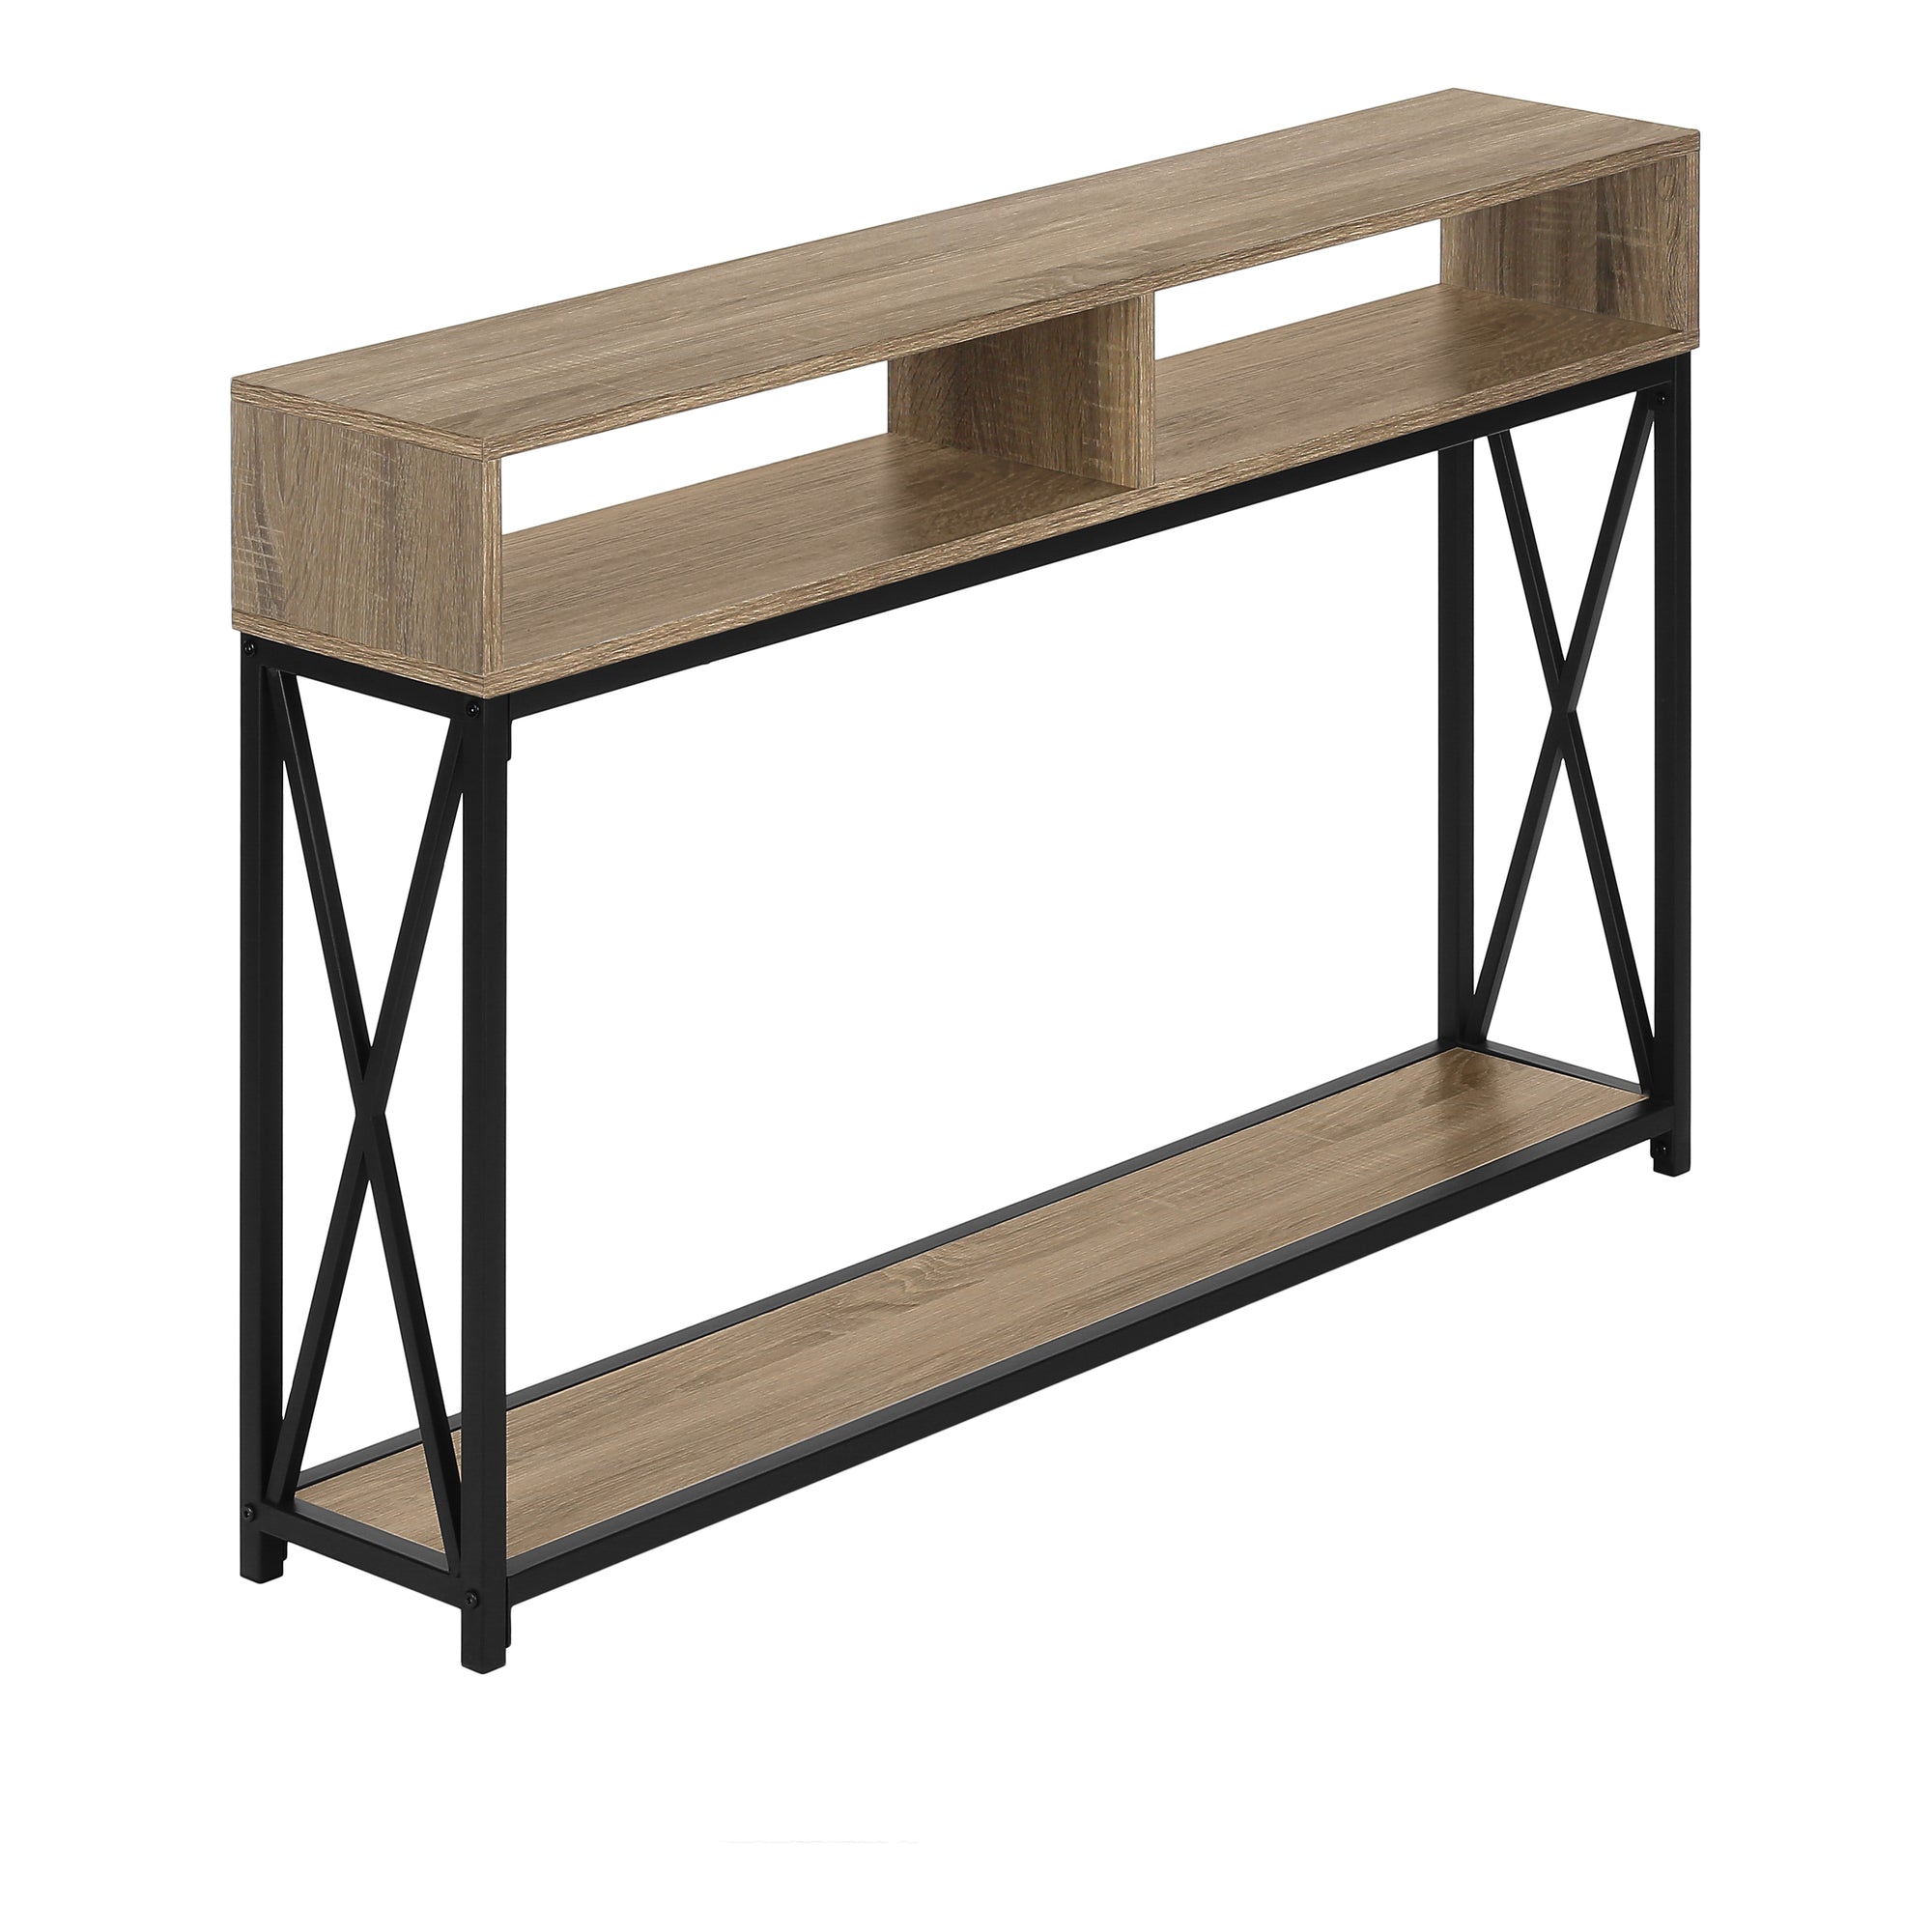 MN-373573    Accent Table, Console, Entryway, Narrow, Sofa, Living Room, Bedroom, Metal Frame, Laminate, Dark Taupe, Black, Contemporary, Modern